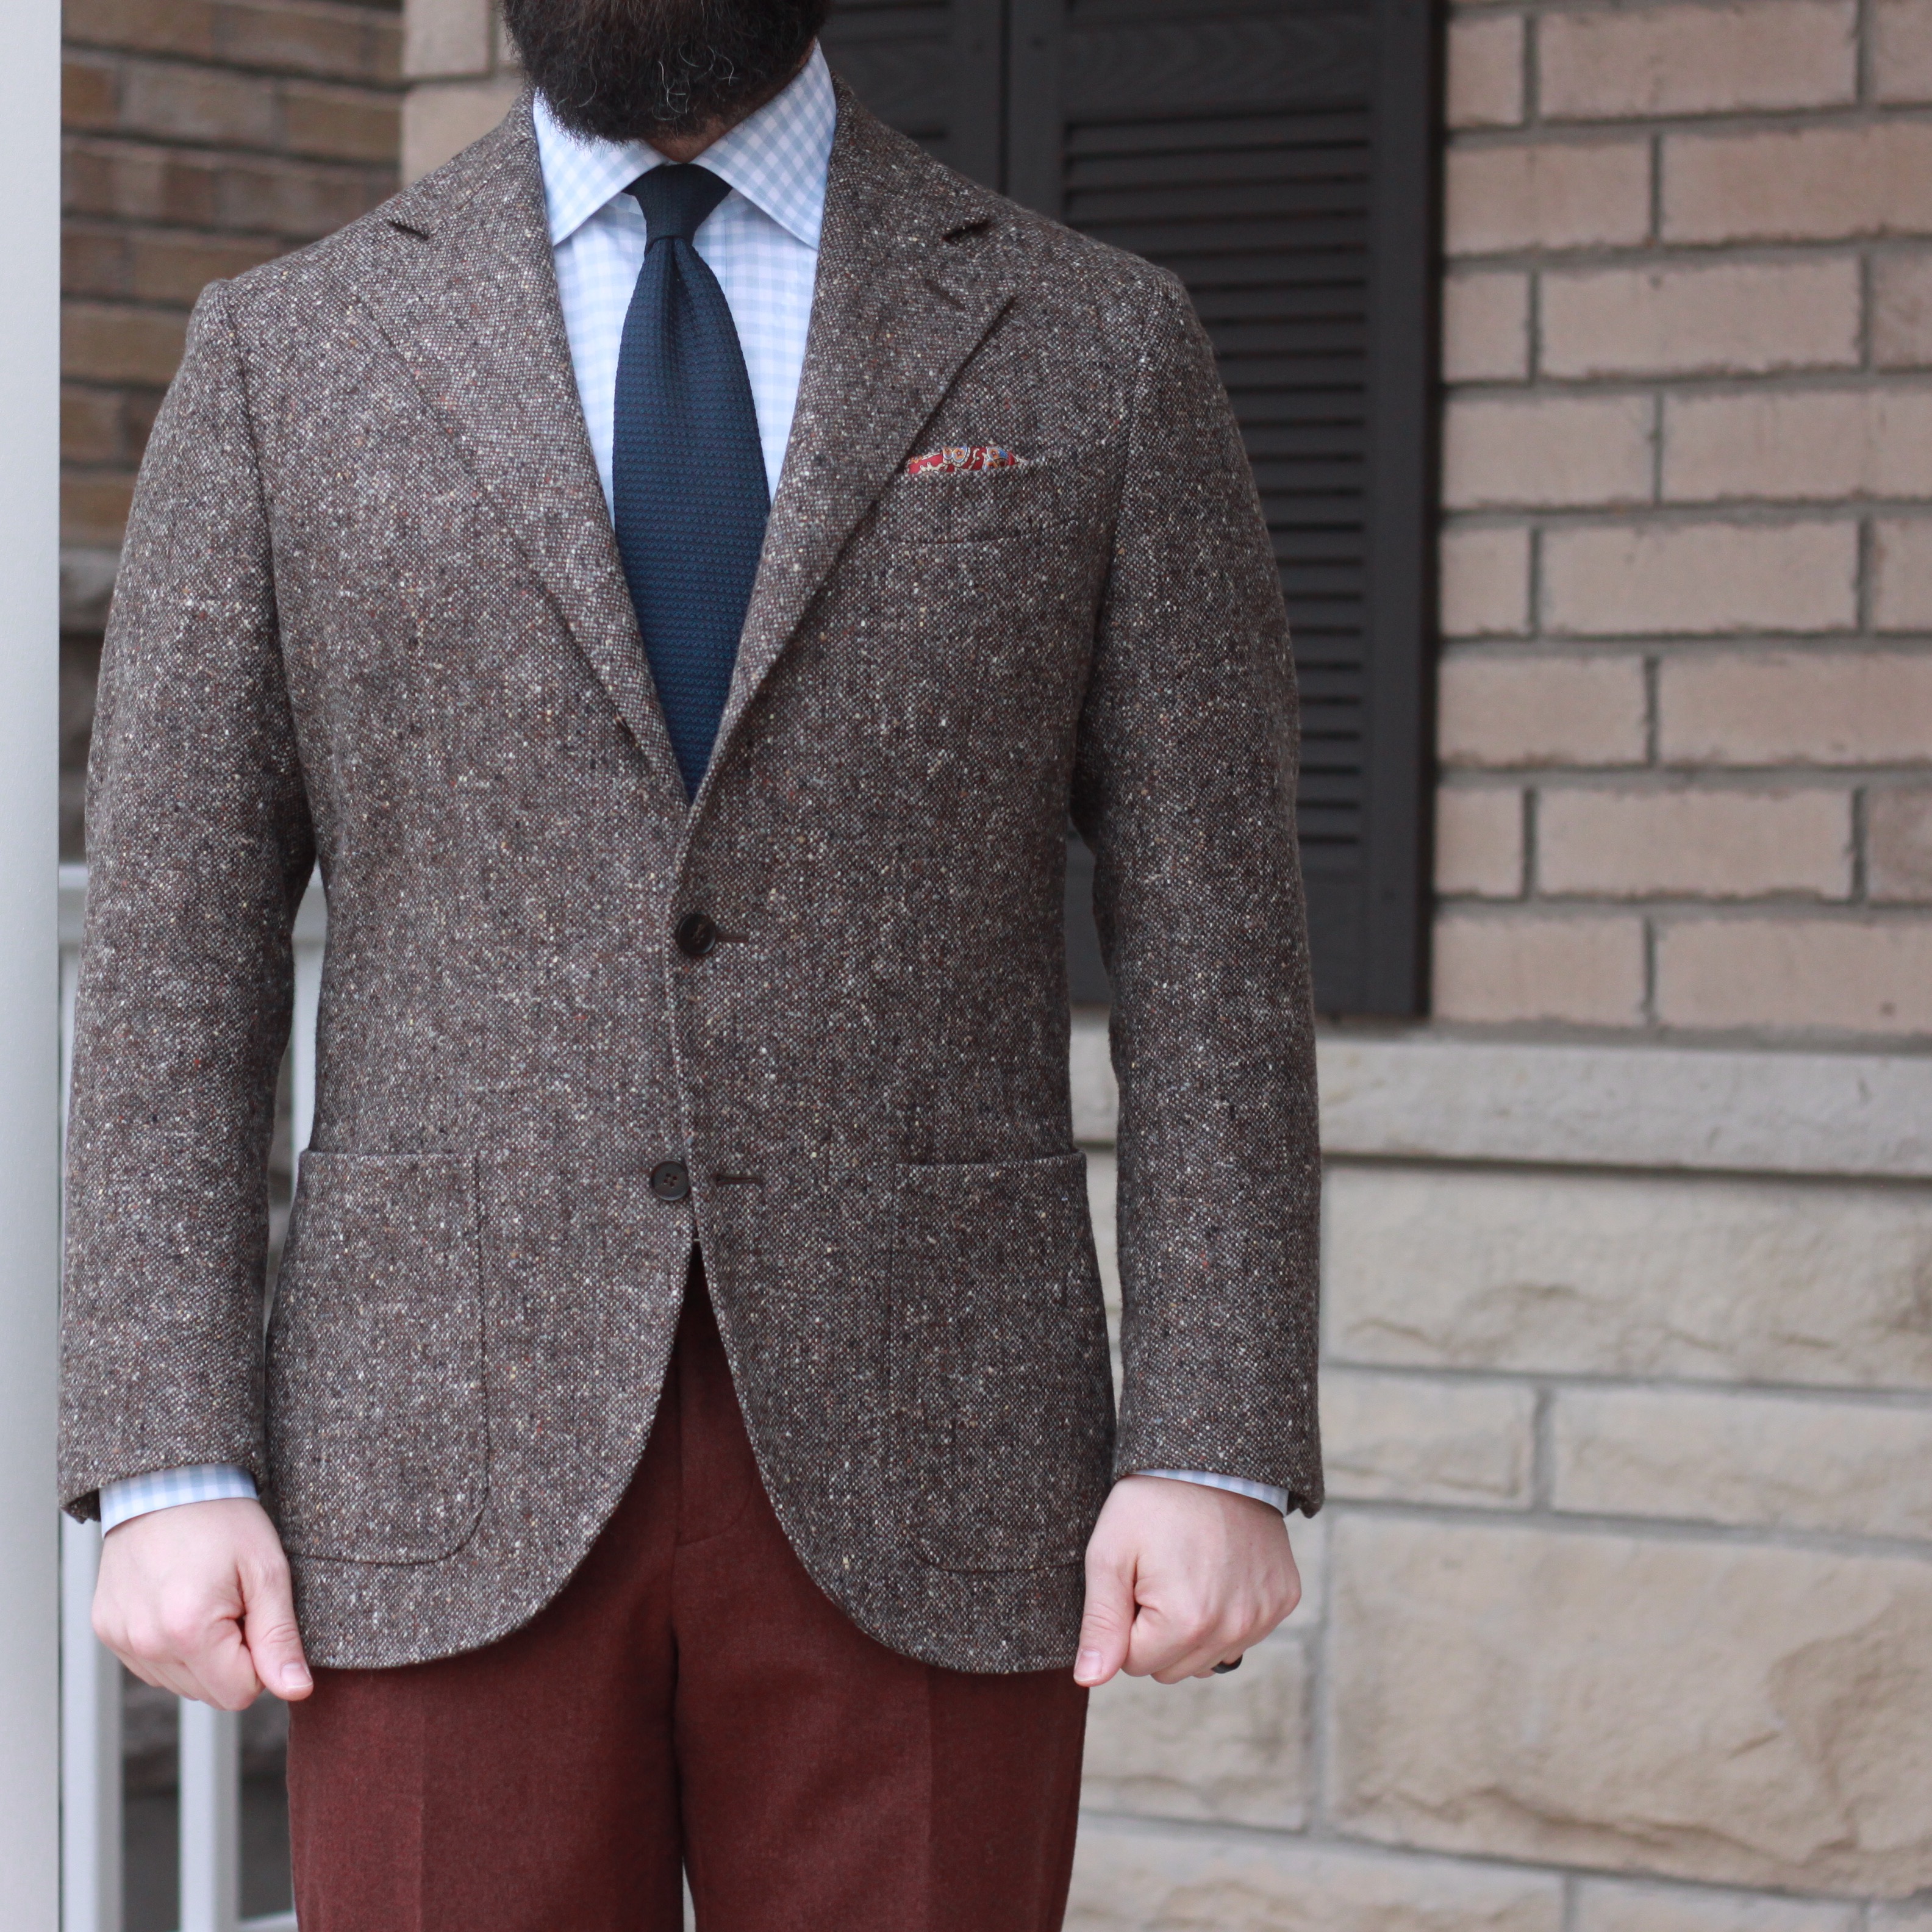 donegal sport coat, grenadine tie, gingham shirt, what i wore, burgundy flannel trousers